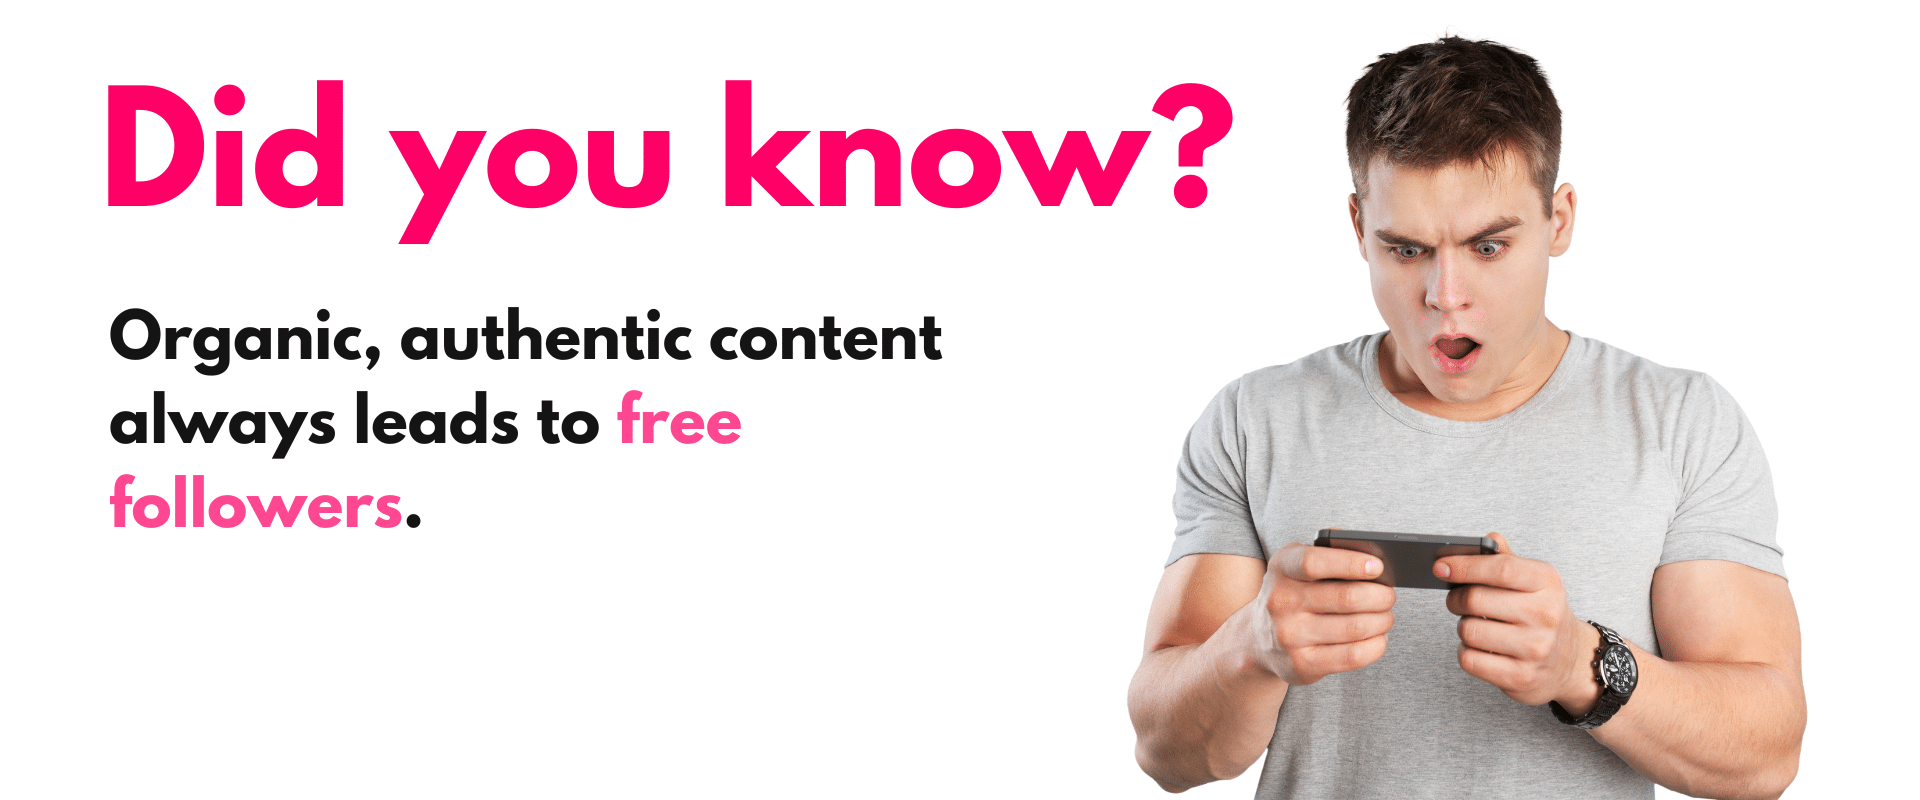 Did you know? Organic content always leads to free Instagram followers.